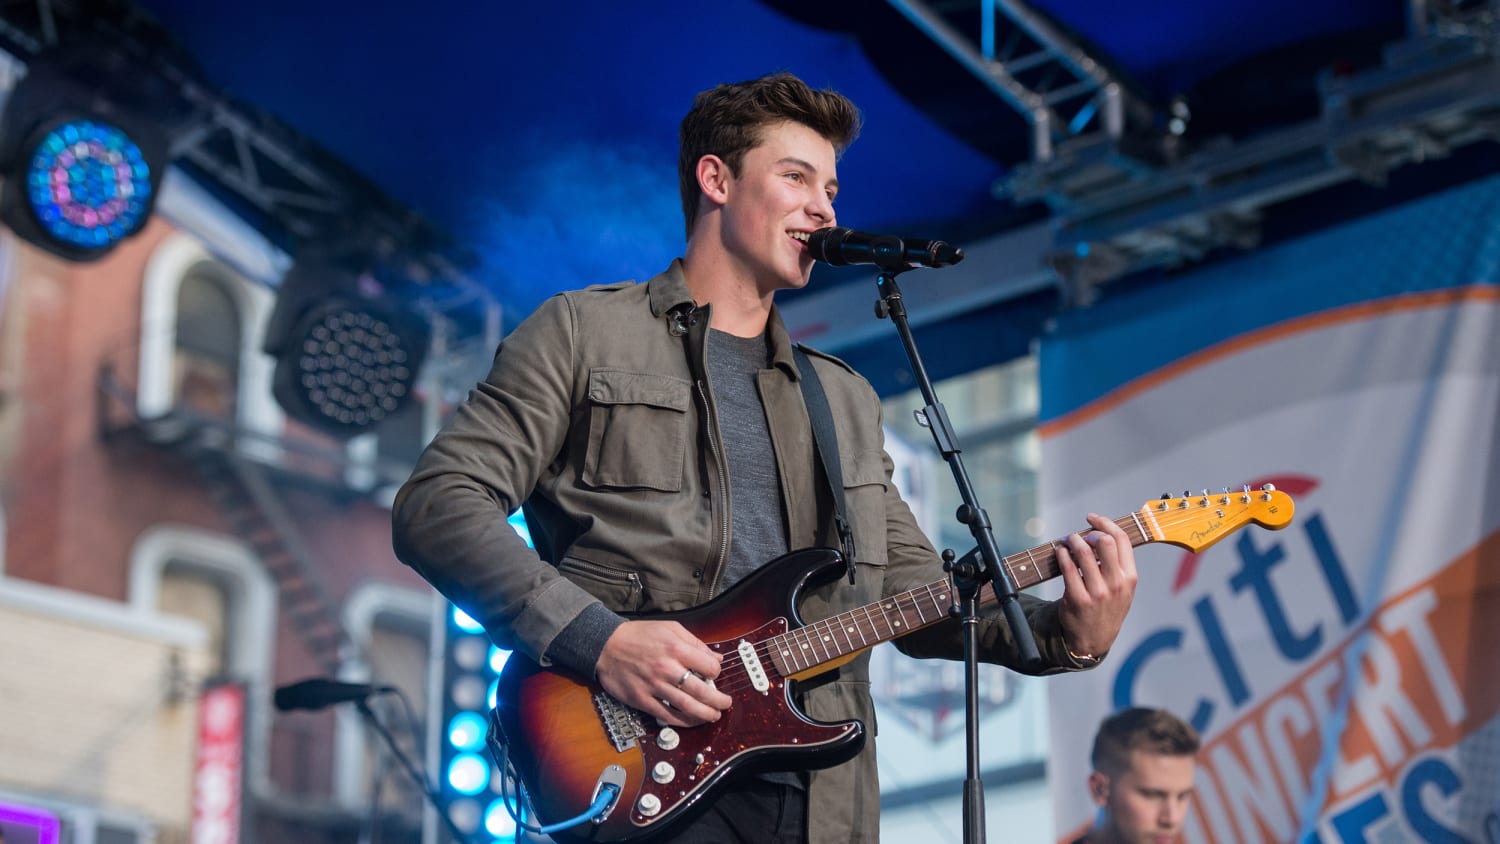 Shawn Mendes brings his hits to the TODAY plaza - TODAY.com2500 x 1407